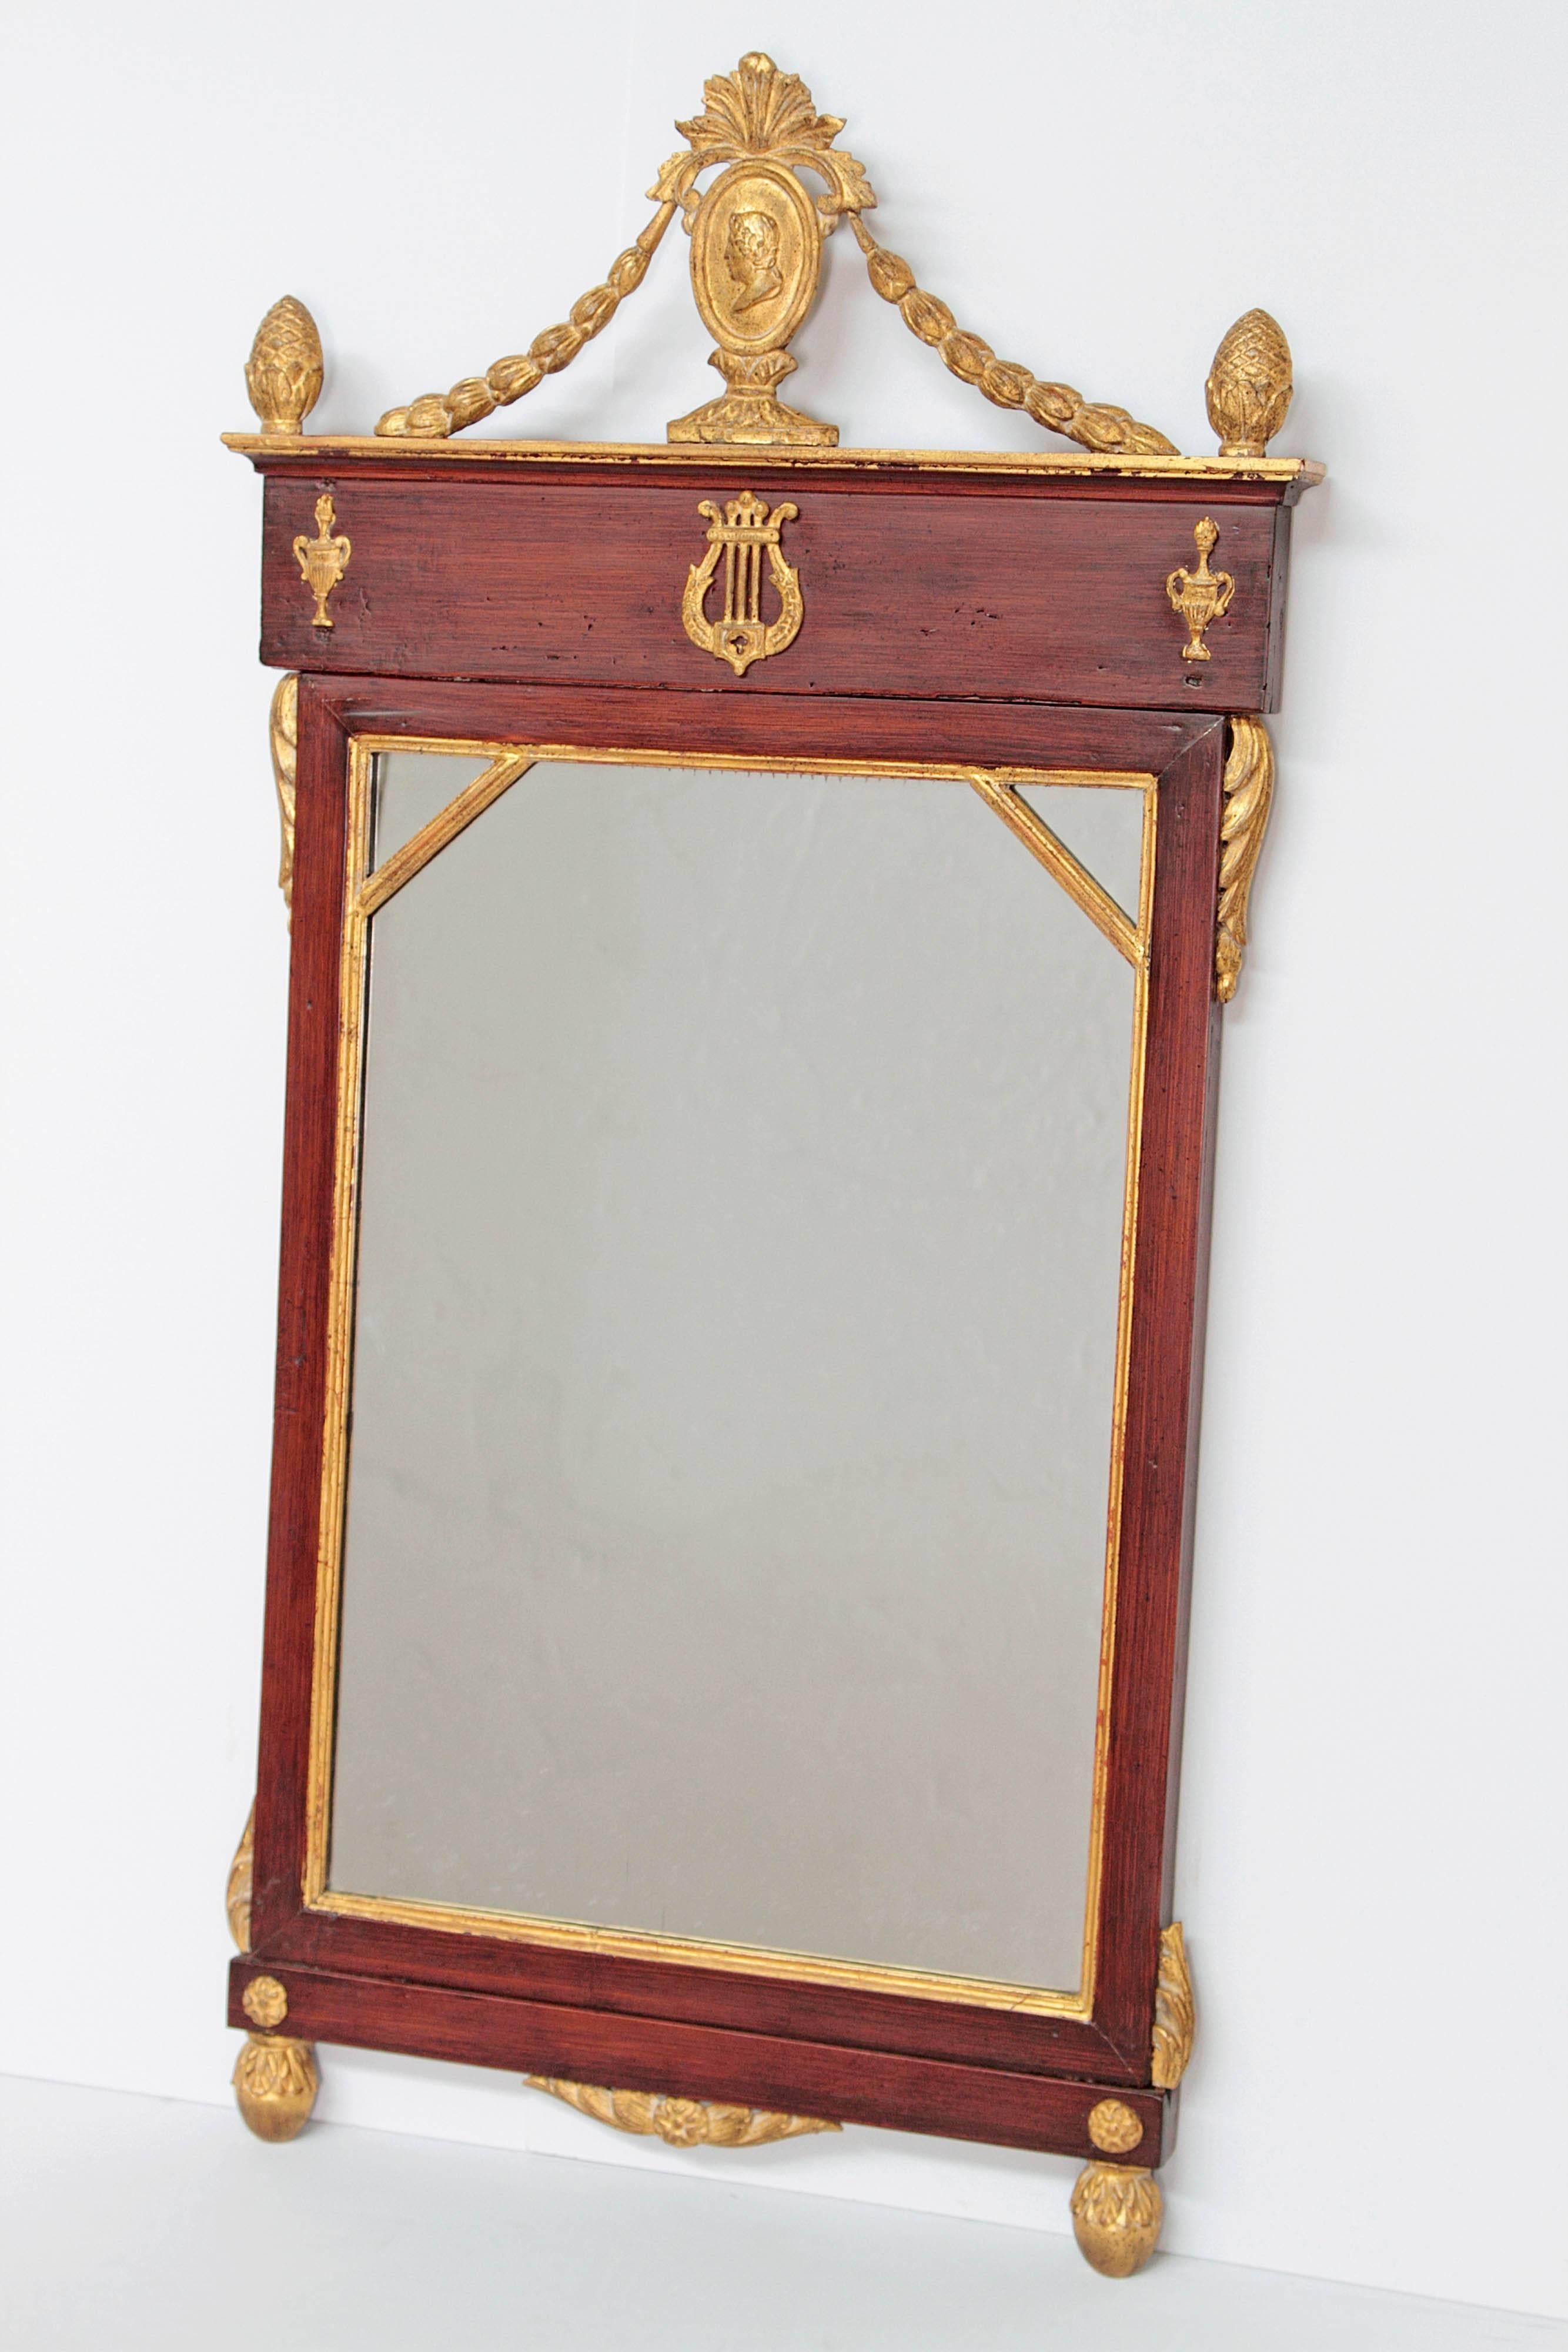 A mahogany and giltwood neoclassic mirror. Portrait of Classic figure in oval at top with swags to frame. Applied urns as sides and lyre in center, all gilt as well as around mirror. Additional decorations on sides and as the corners. Early 19th